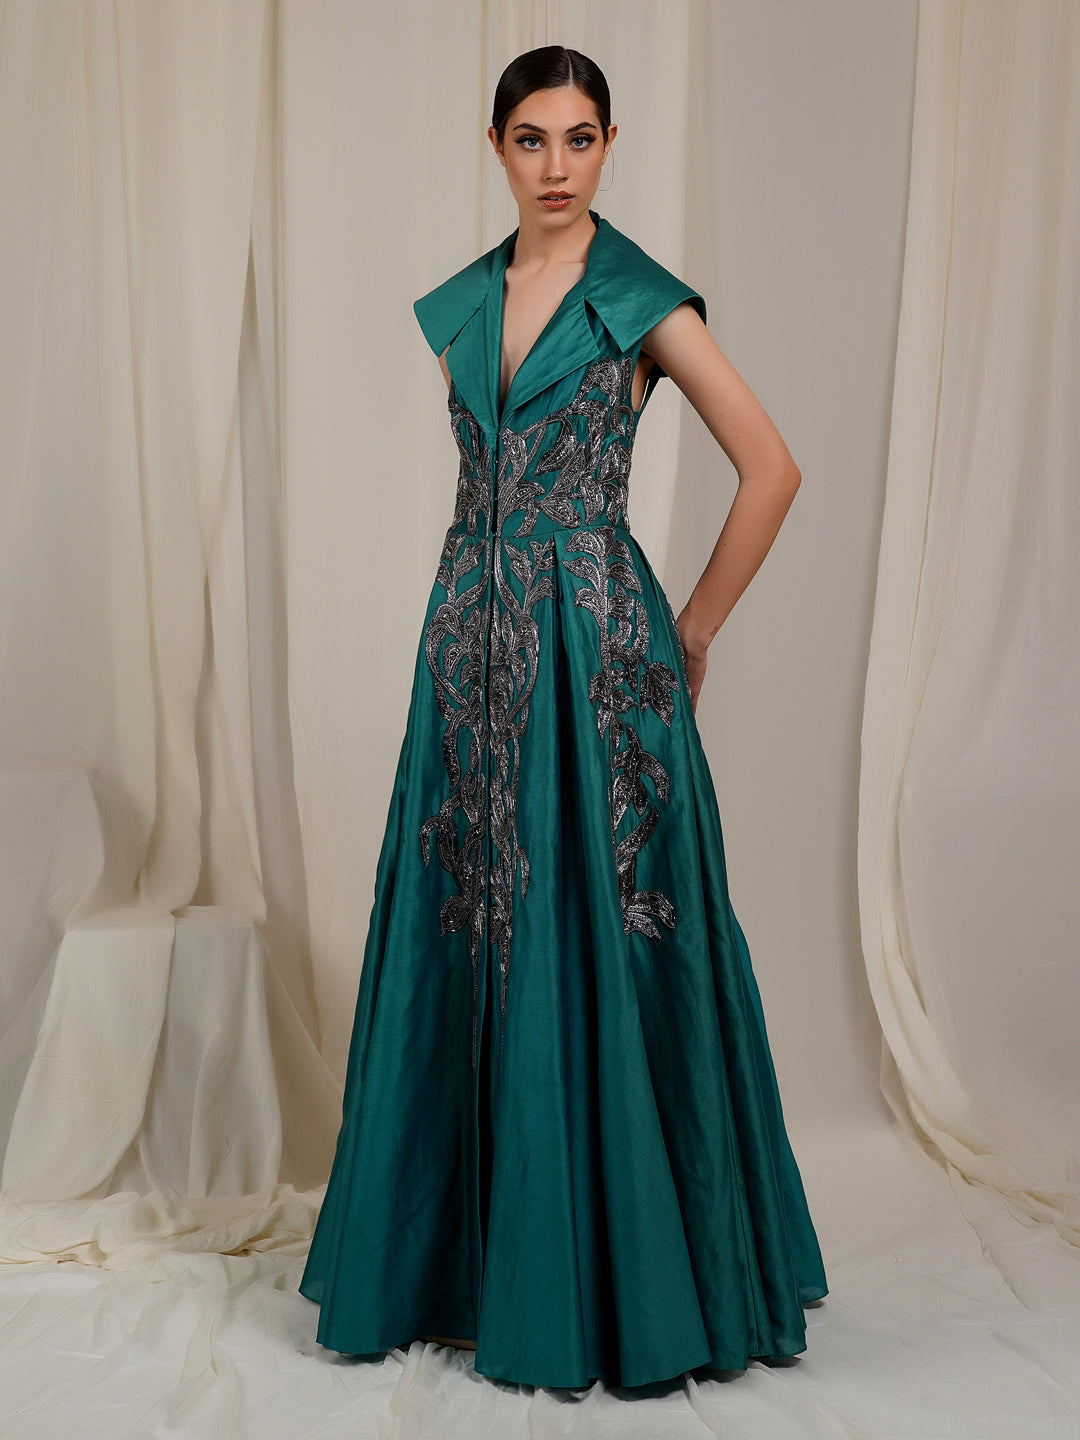 A Green Cotton silk Floor-Length Dress That Has A Plunging V-Neck